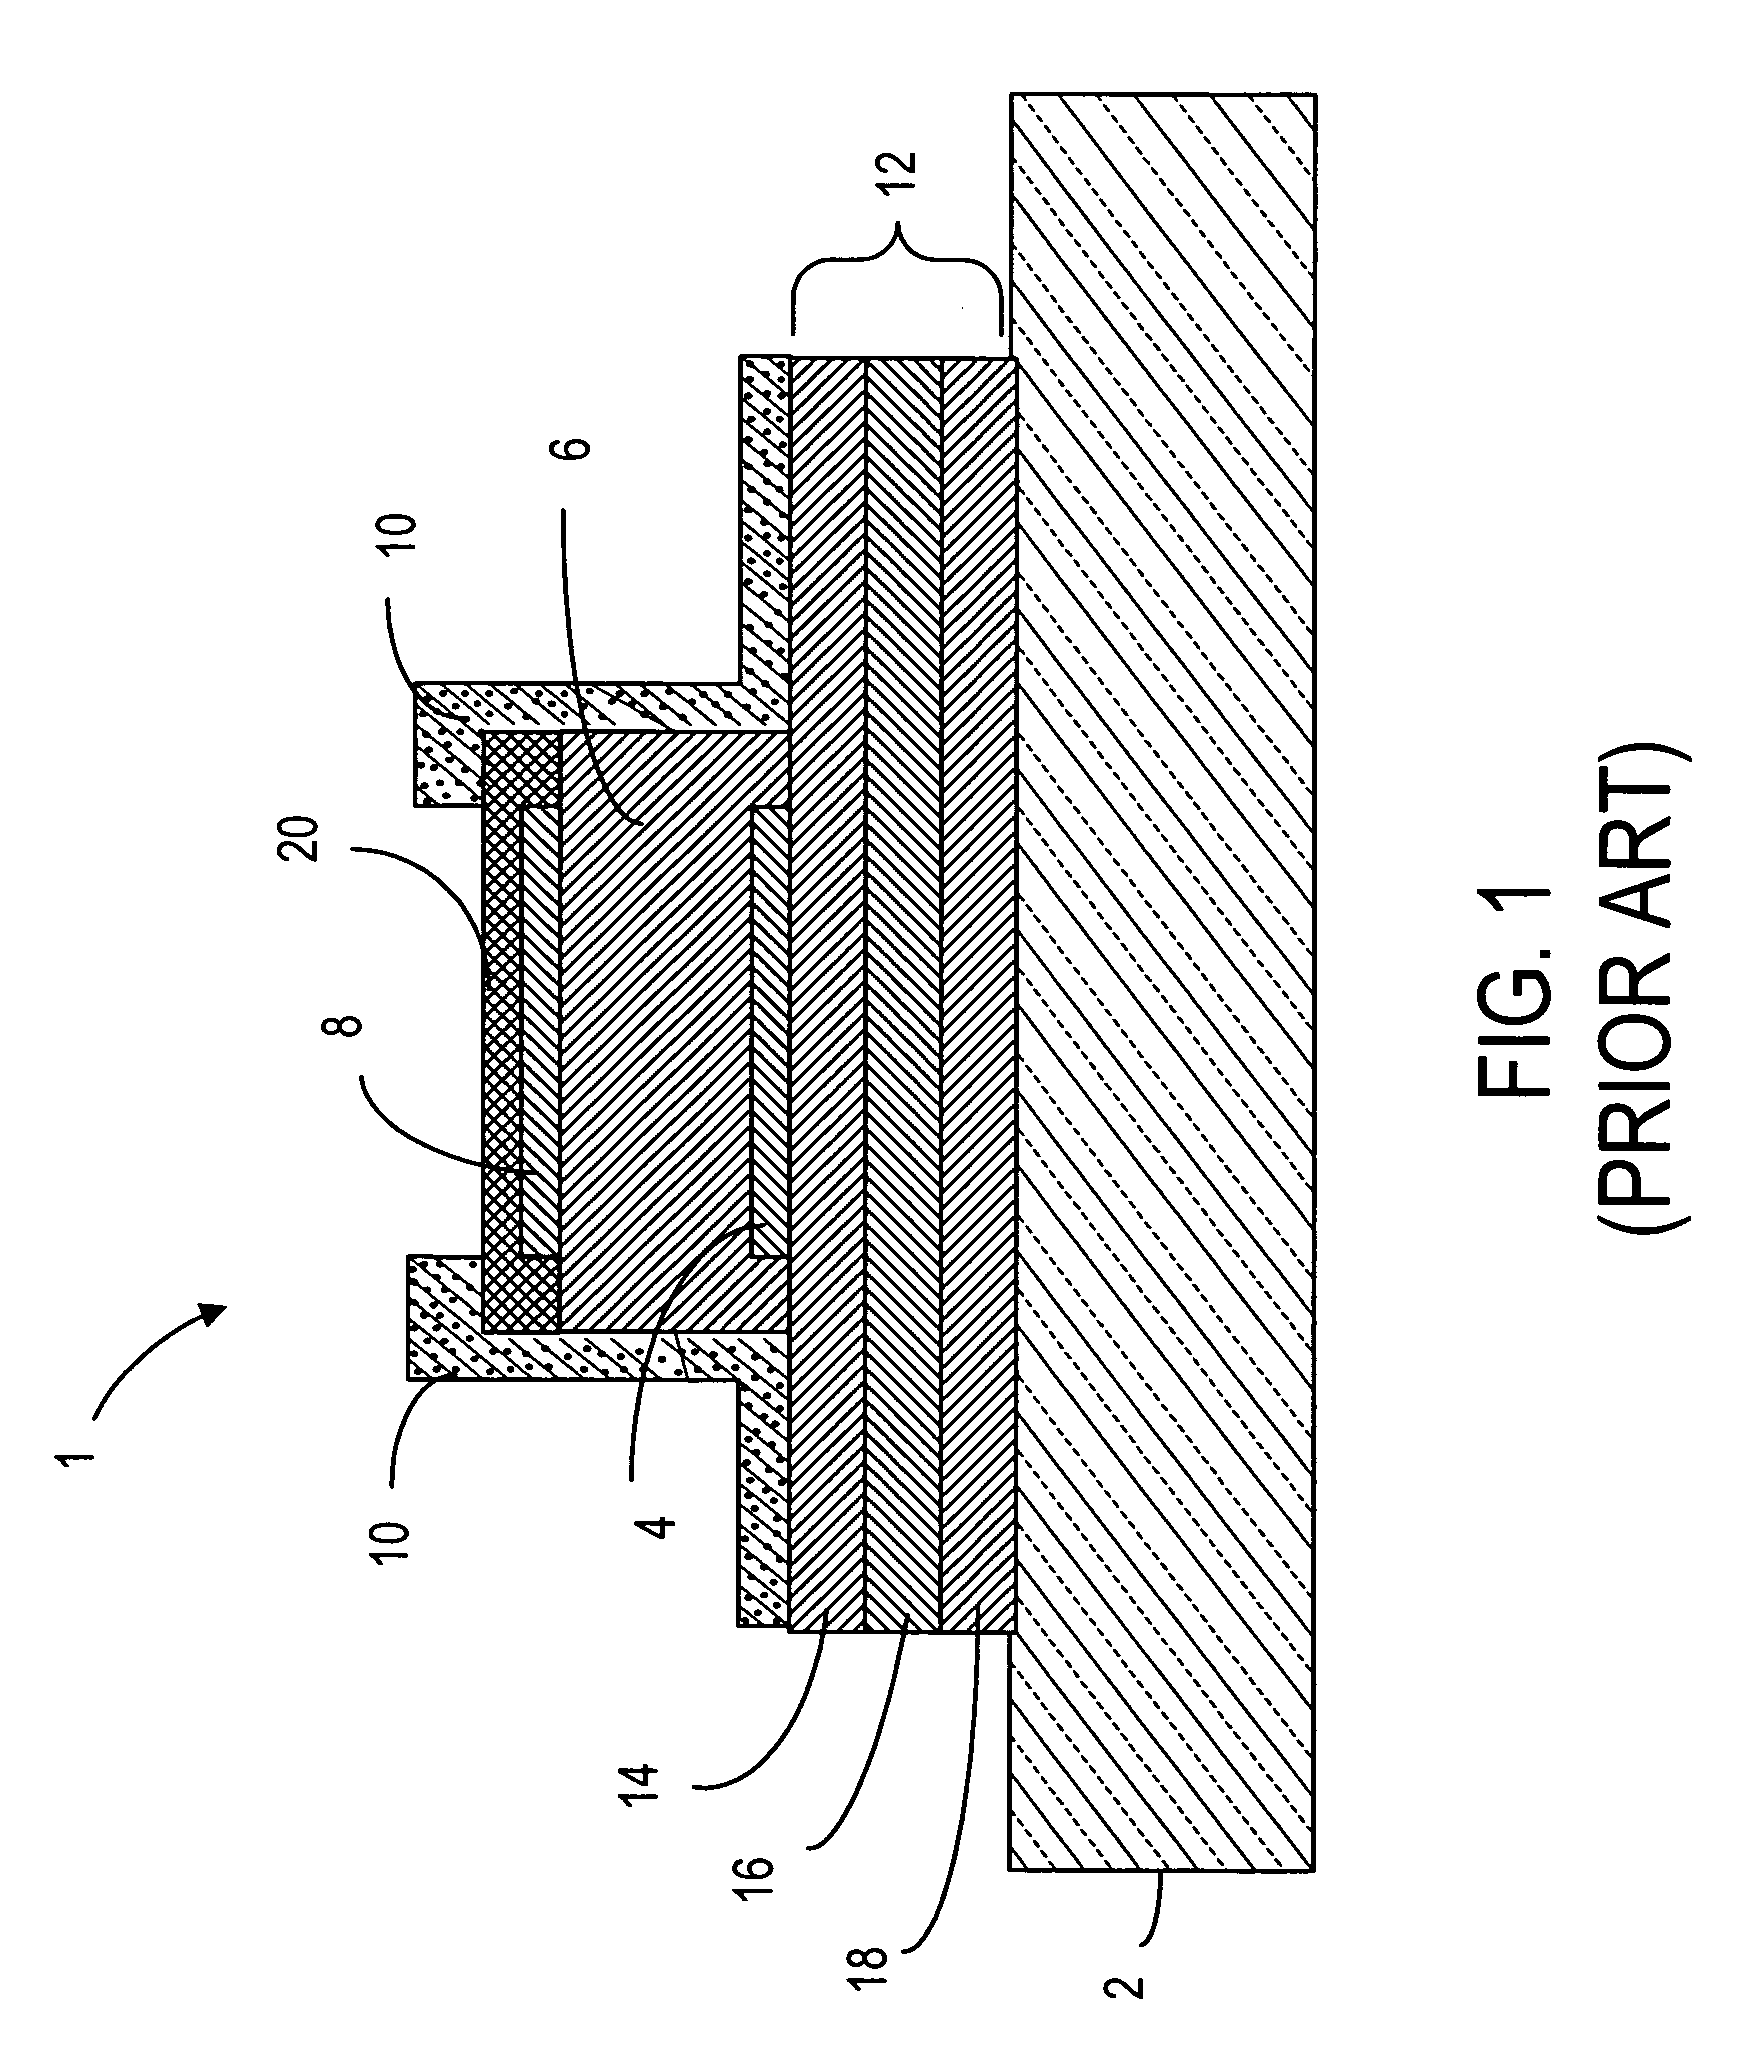 Encapsulated electronics device with improved heat dissipation